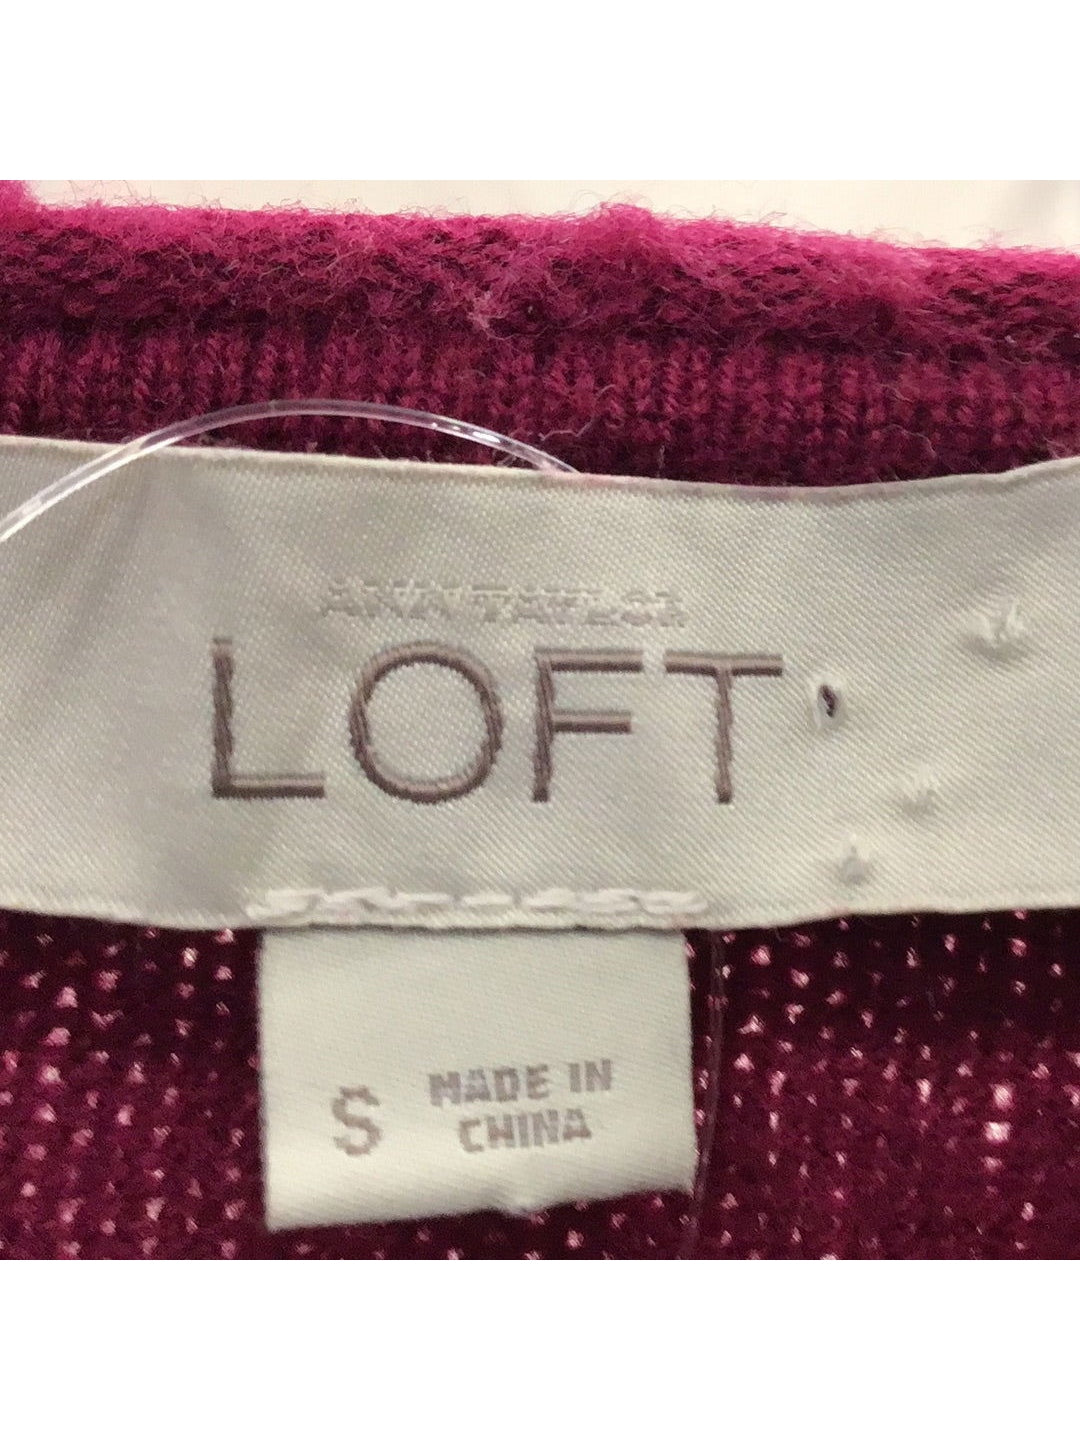 Ann Taylor Loft Girls' Small Magenta Sweater - The Kennedy Collective Thrift - 